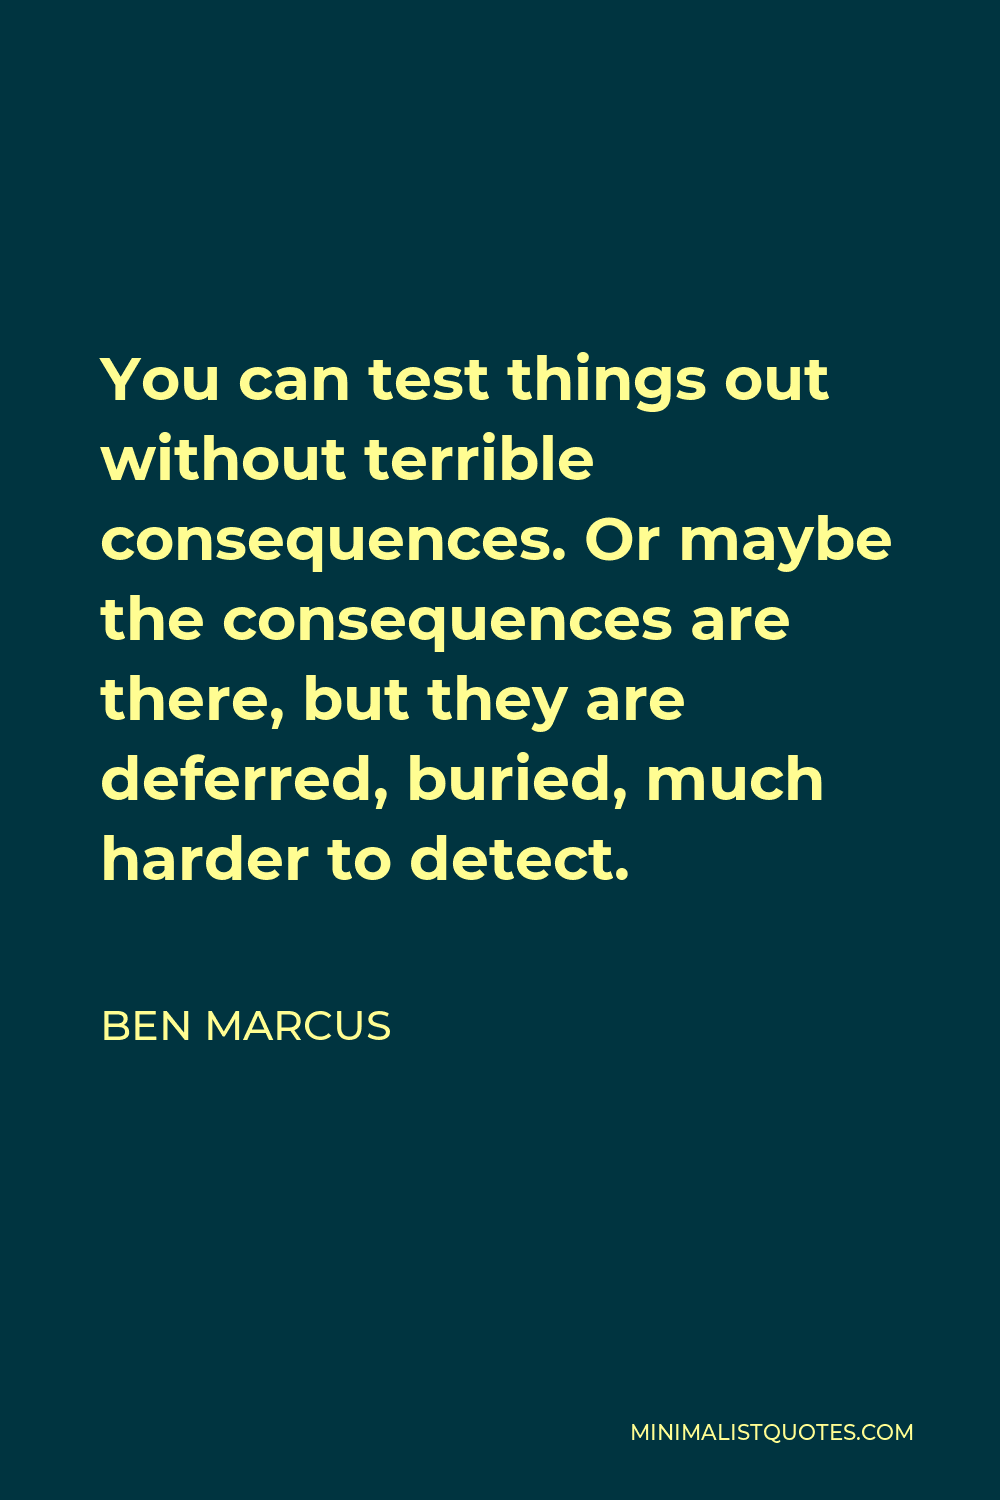 Ben Marcus Quote - You can test things out without terrible consequences. Or maybe the consequences are there, but they are deferred, buried, much harder to detect.